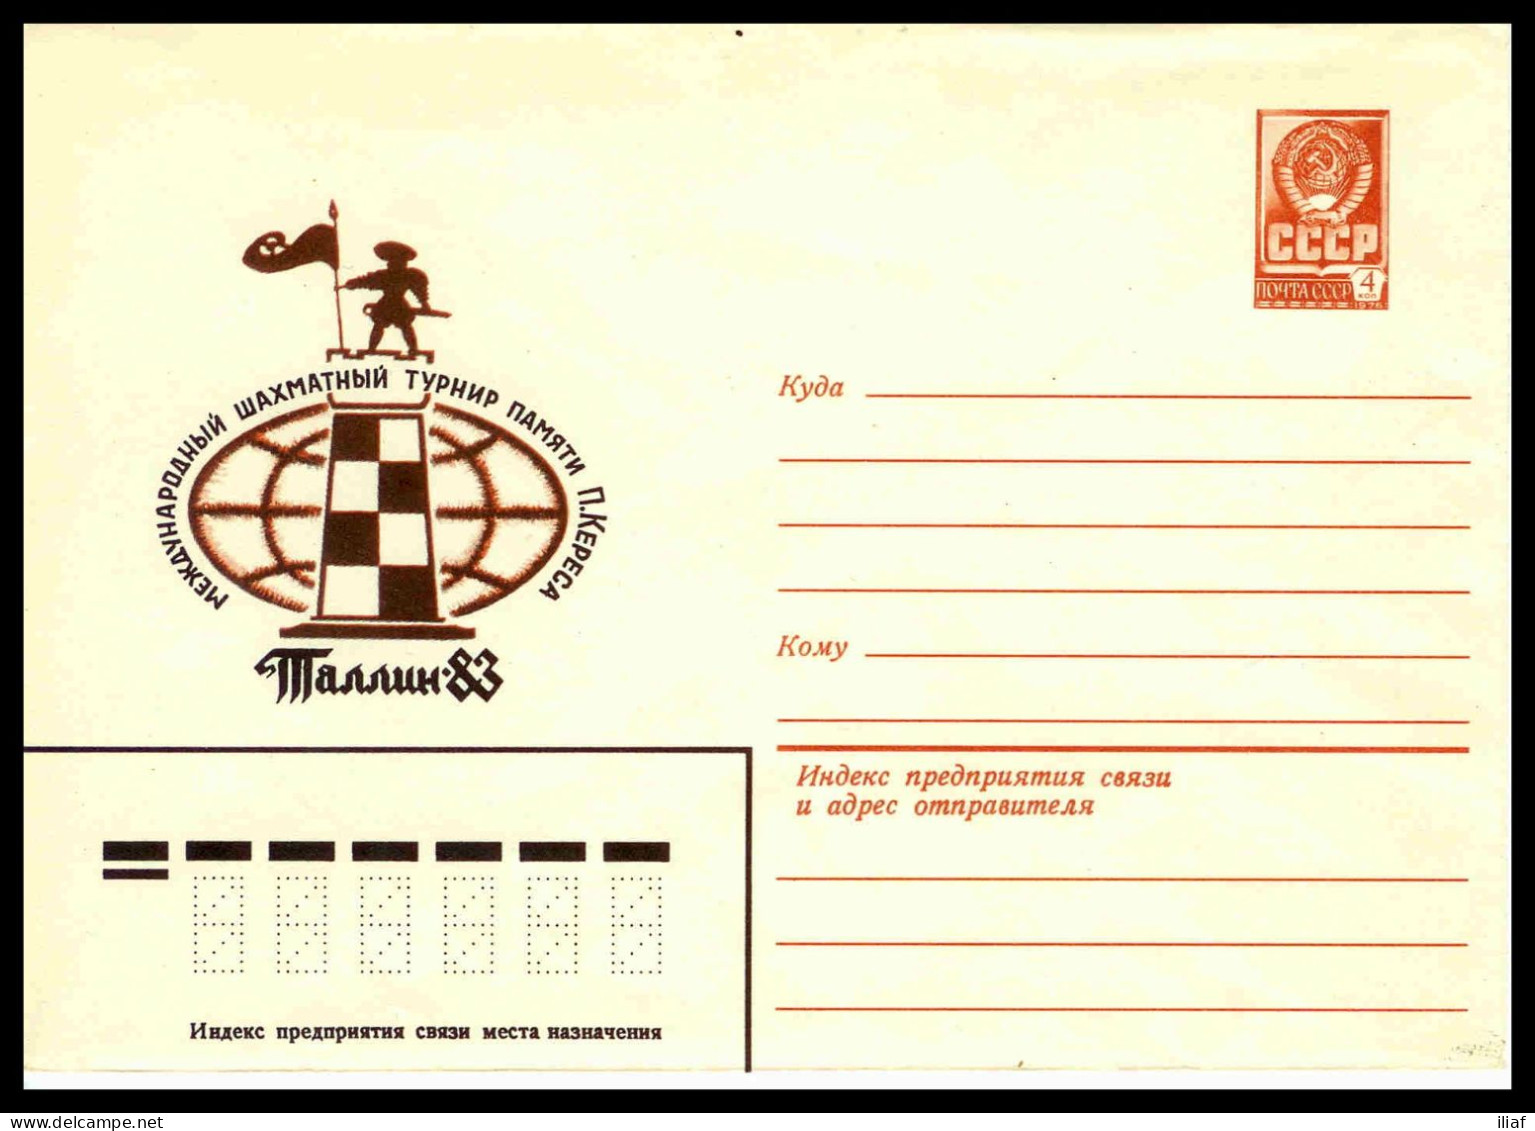 RUSSIA & USSR Chess Paul Keres Chess Memorial Tournament 1983  Illustrated Envelop 0001 - Ajedrez